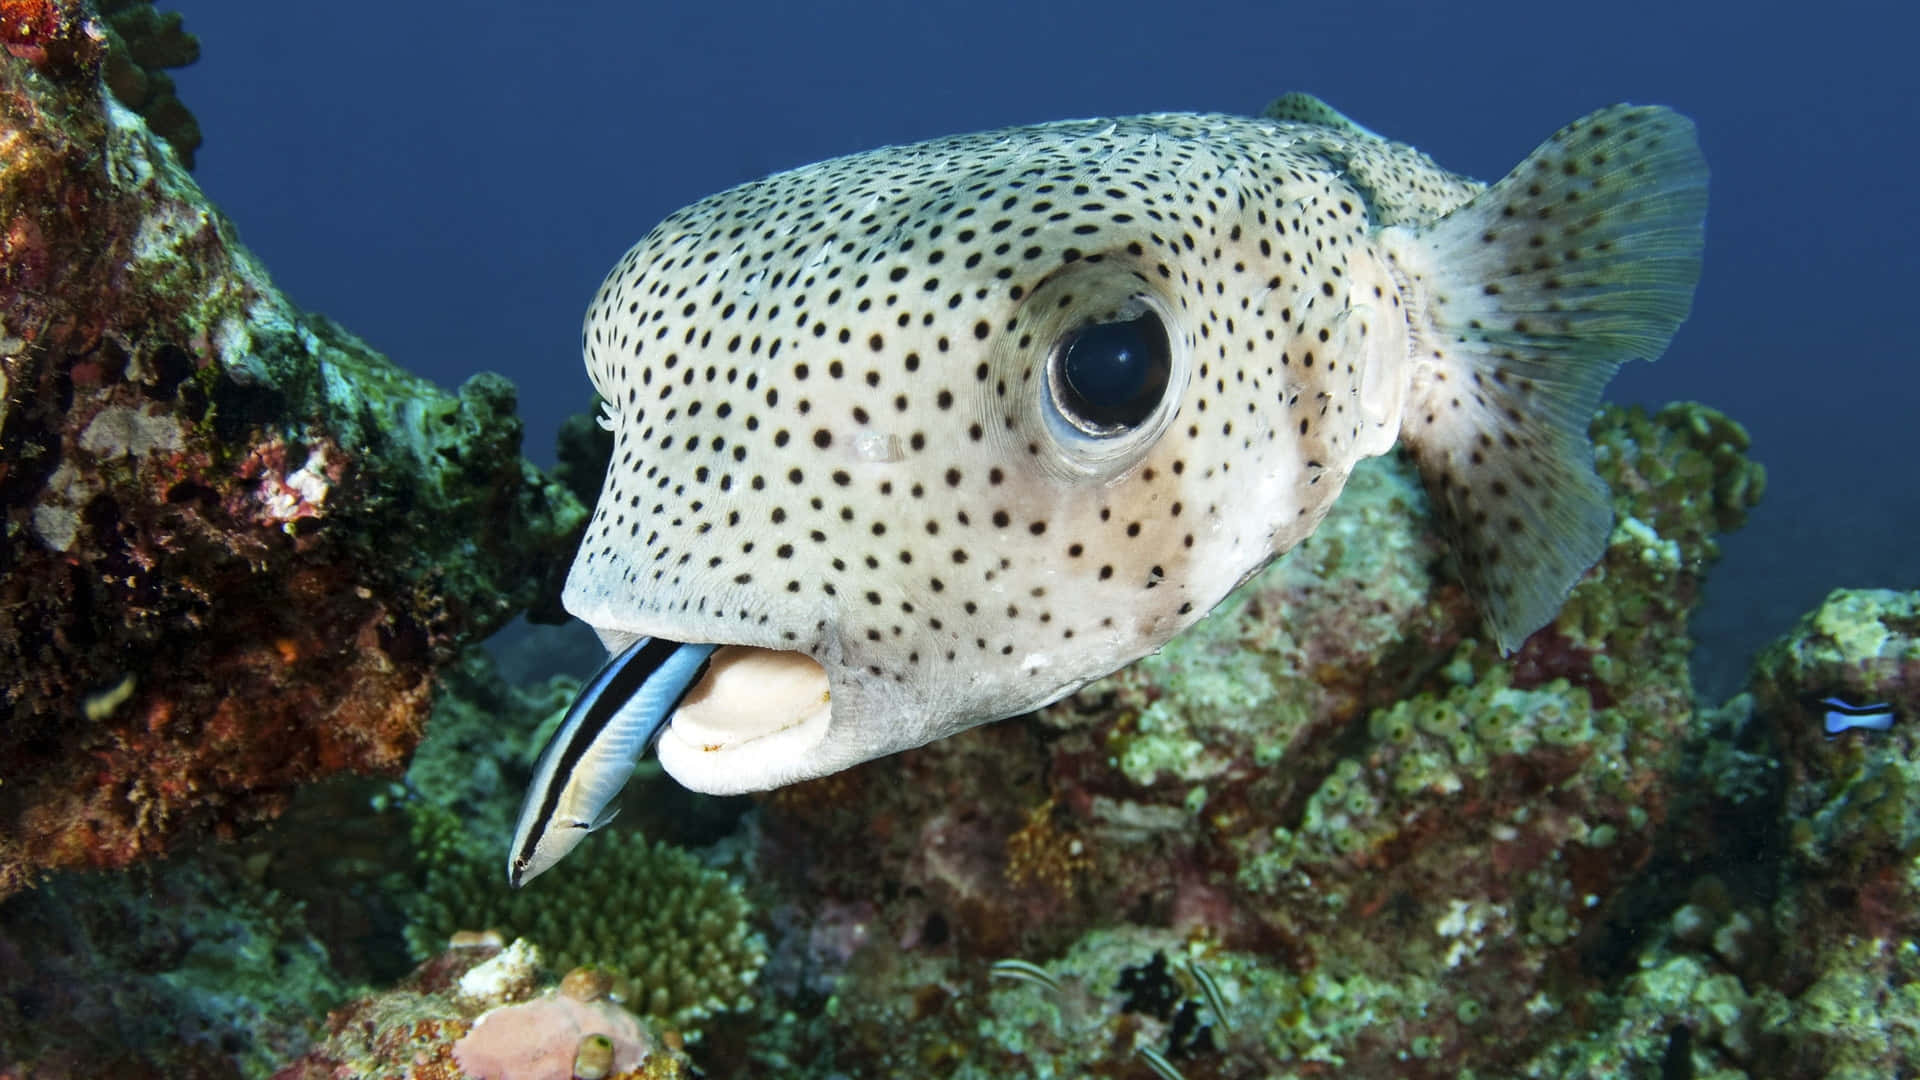 A Stunning Close-up Of A Porcupinefish In Its Natural Habitat Wallpaper